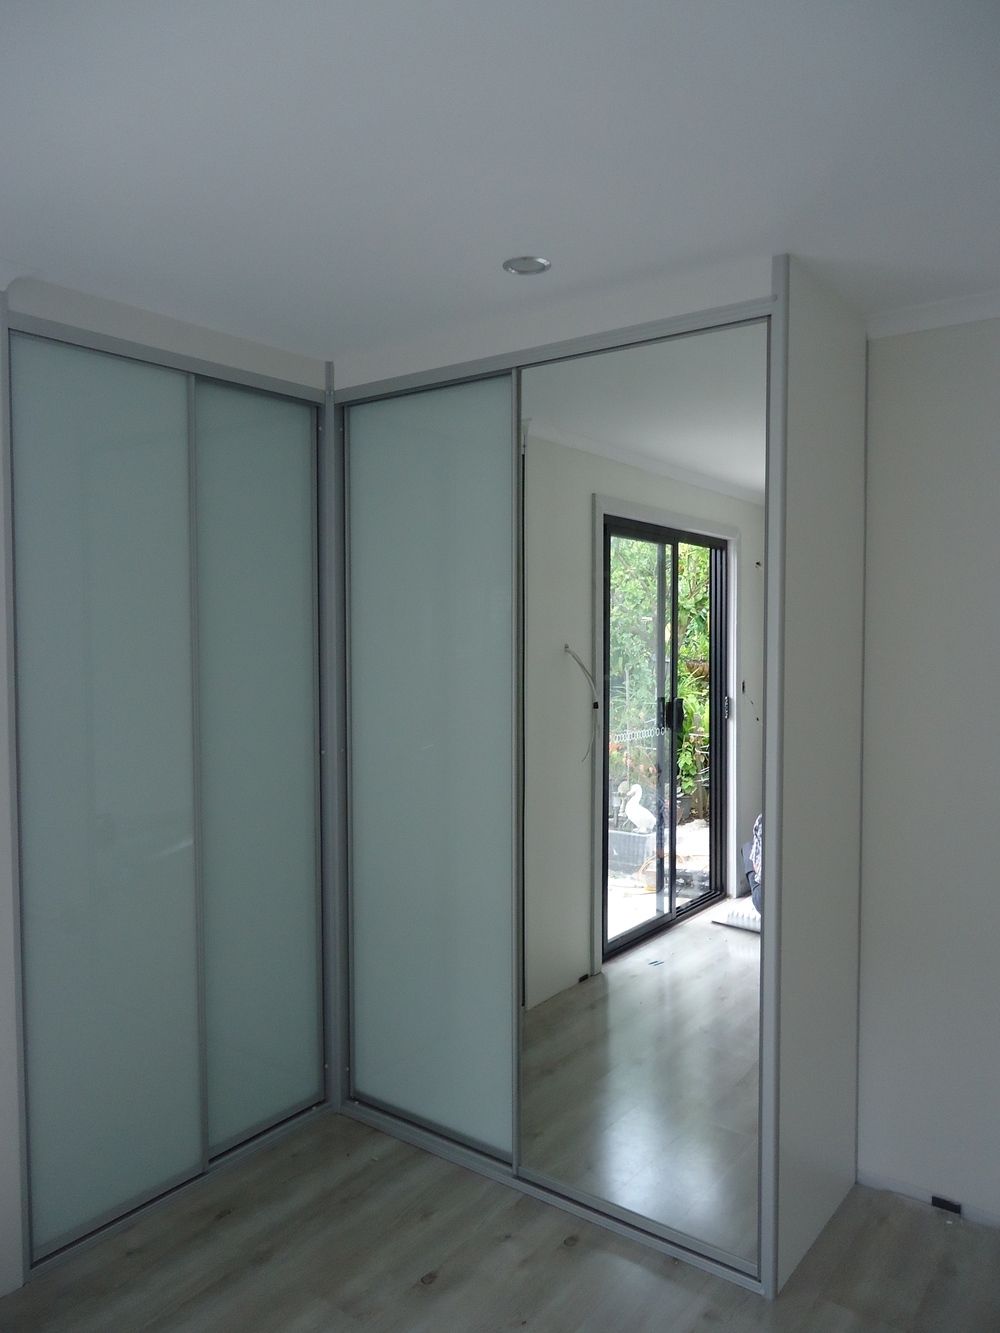 Mirrored Corner Wardrobes Regarding Latest Contemporary Sliding Wardrobes — Quality Kitchens And Wardrobes (View 9 of 15)